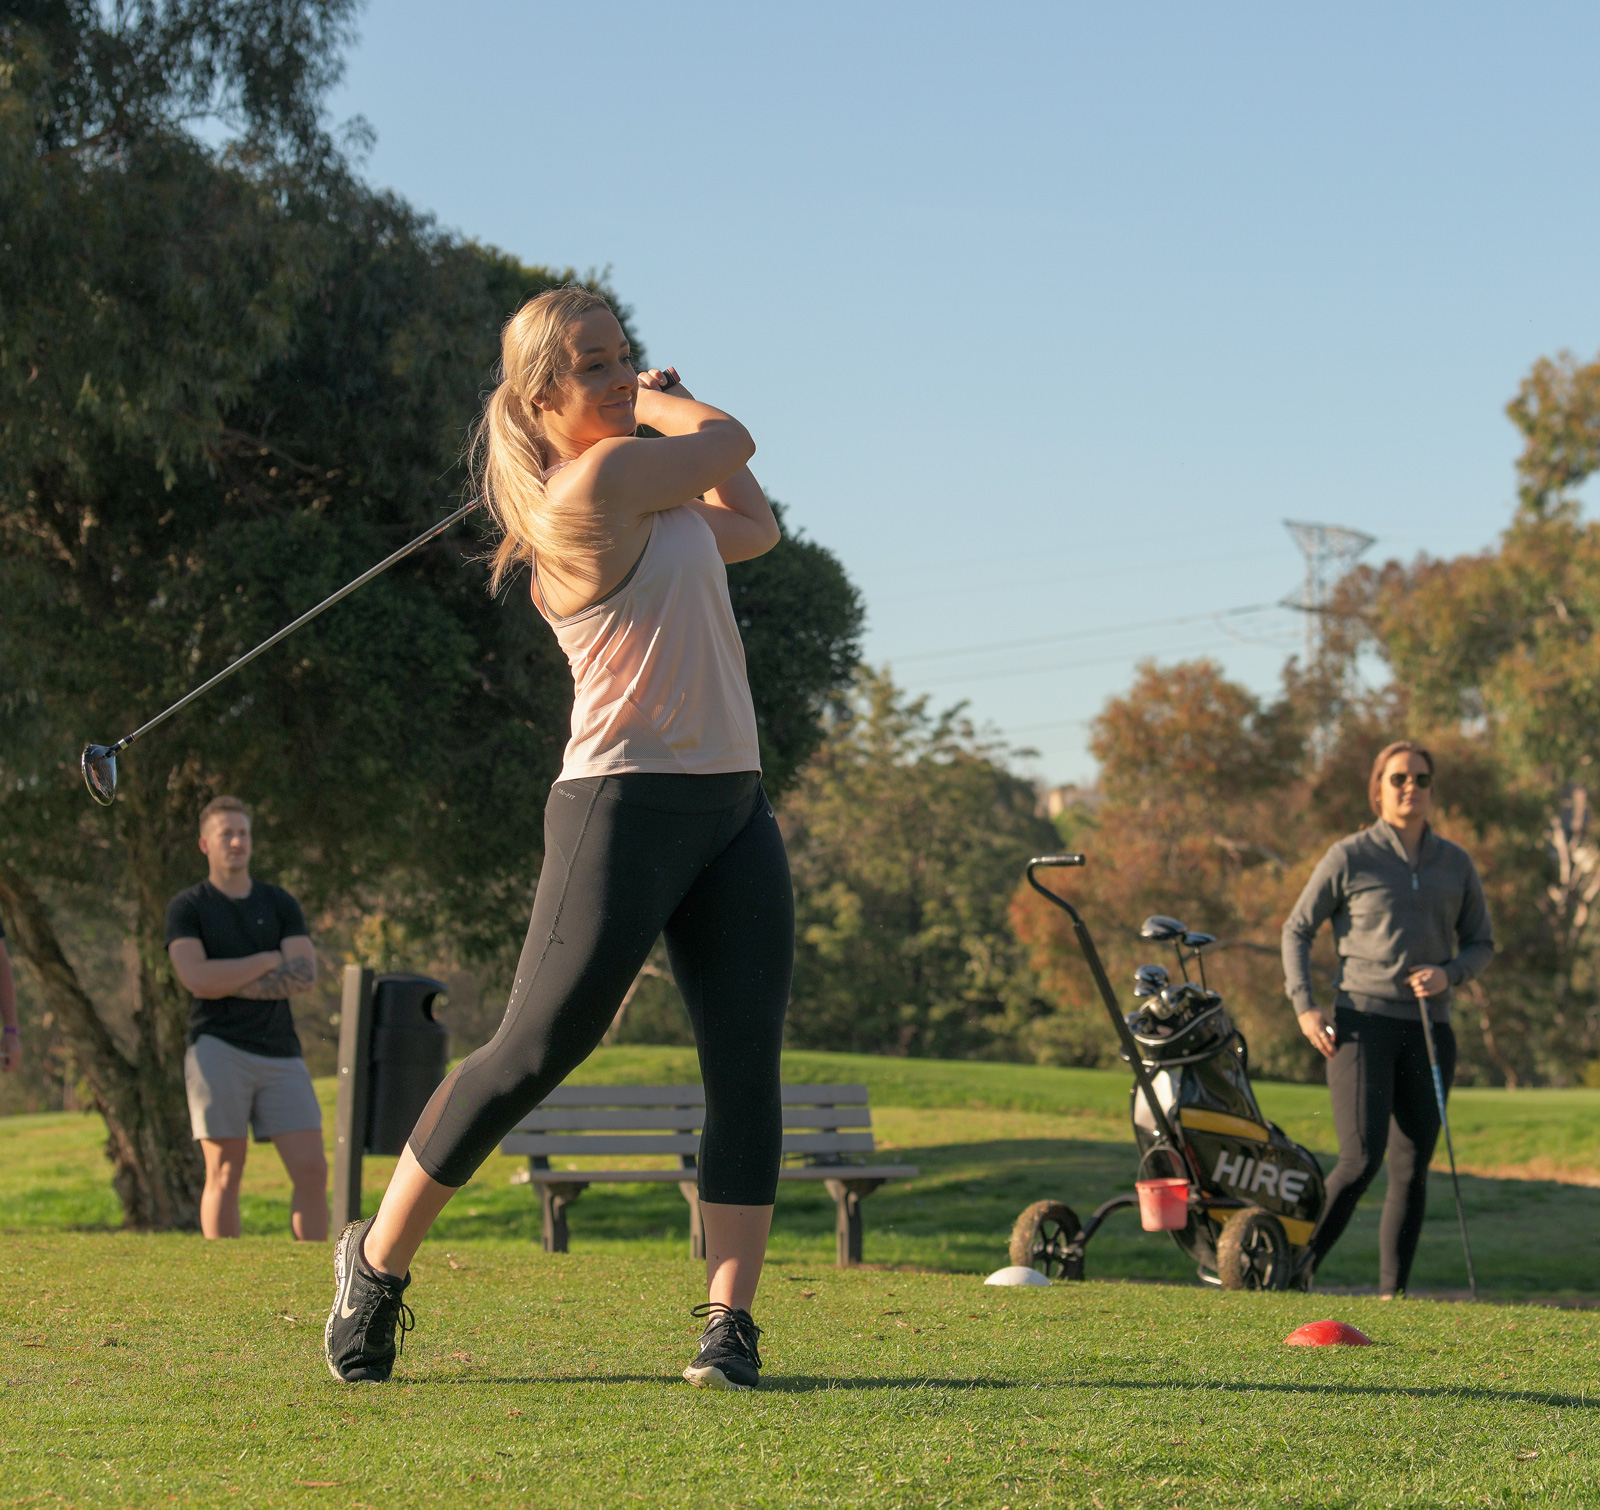 Image of female golfer swinging her club at Burnley Golf Course, with three other people in the background.